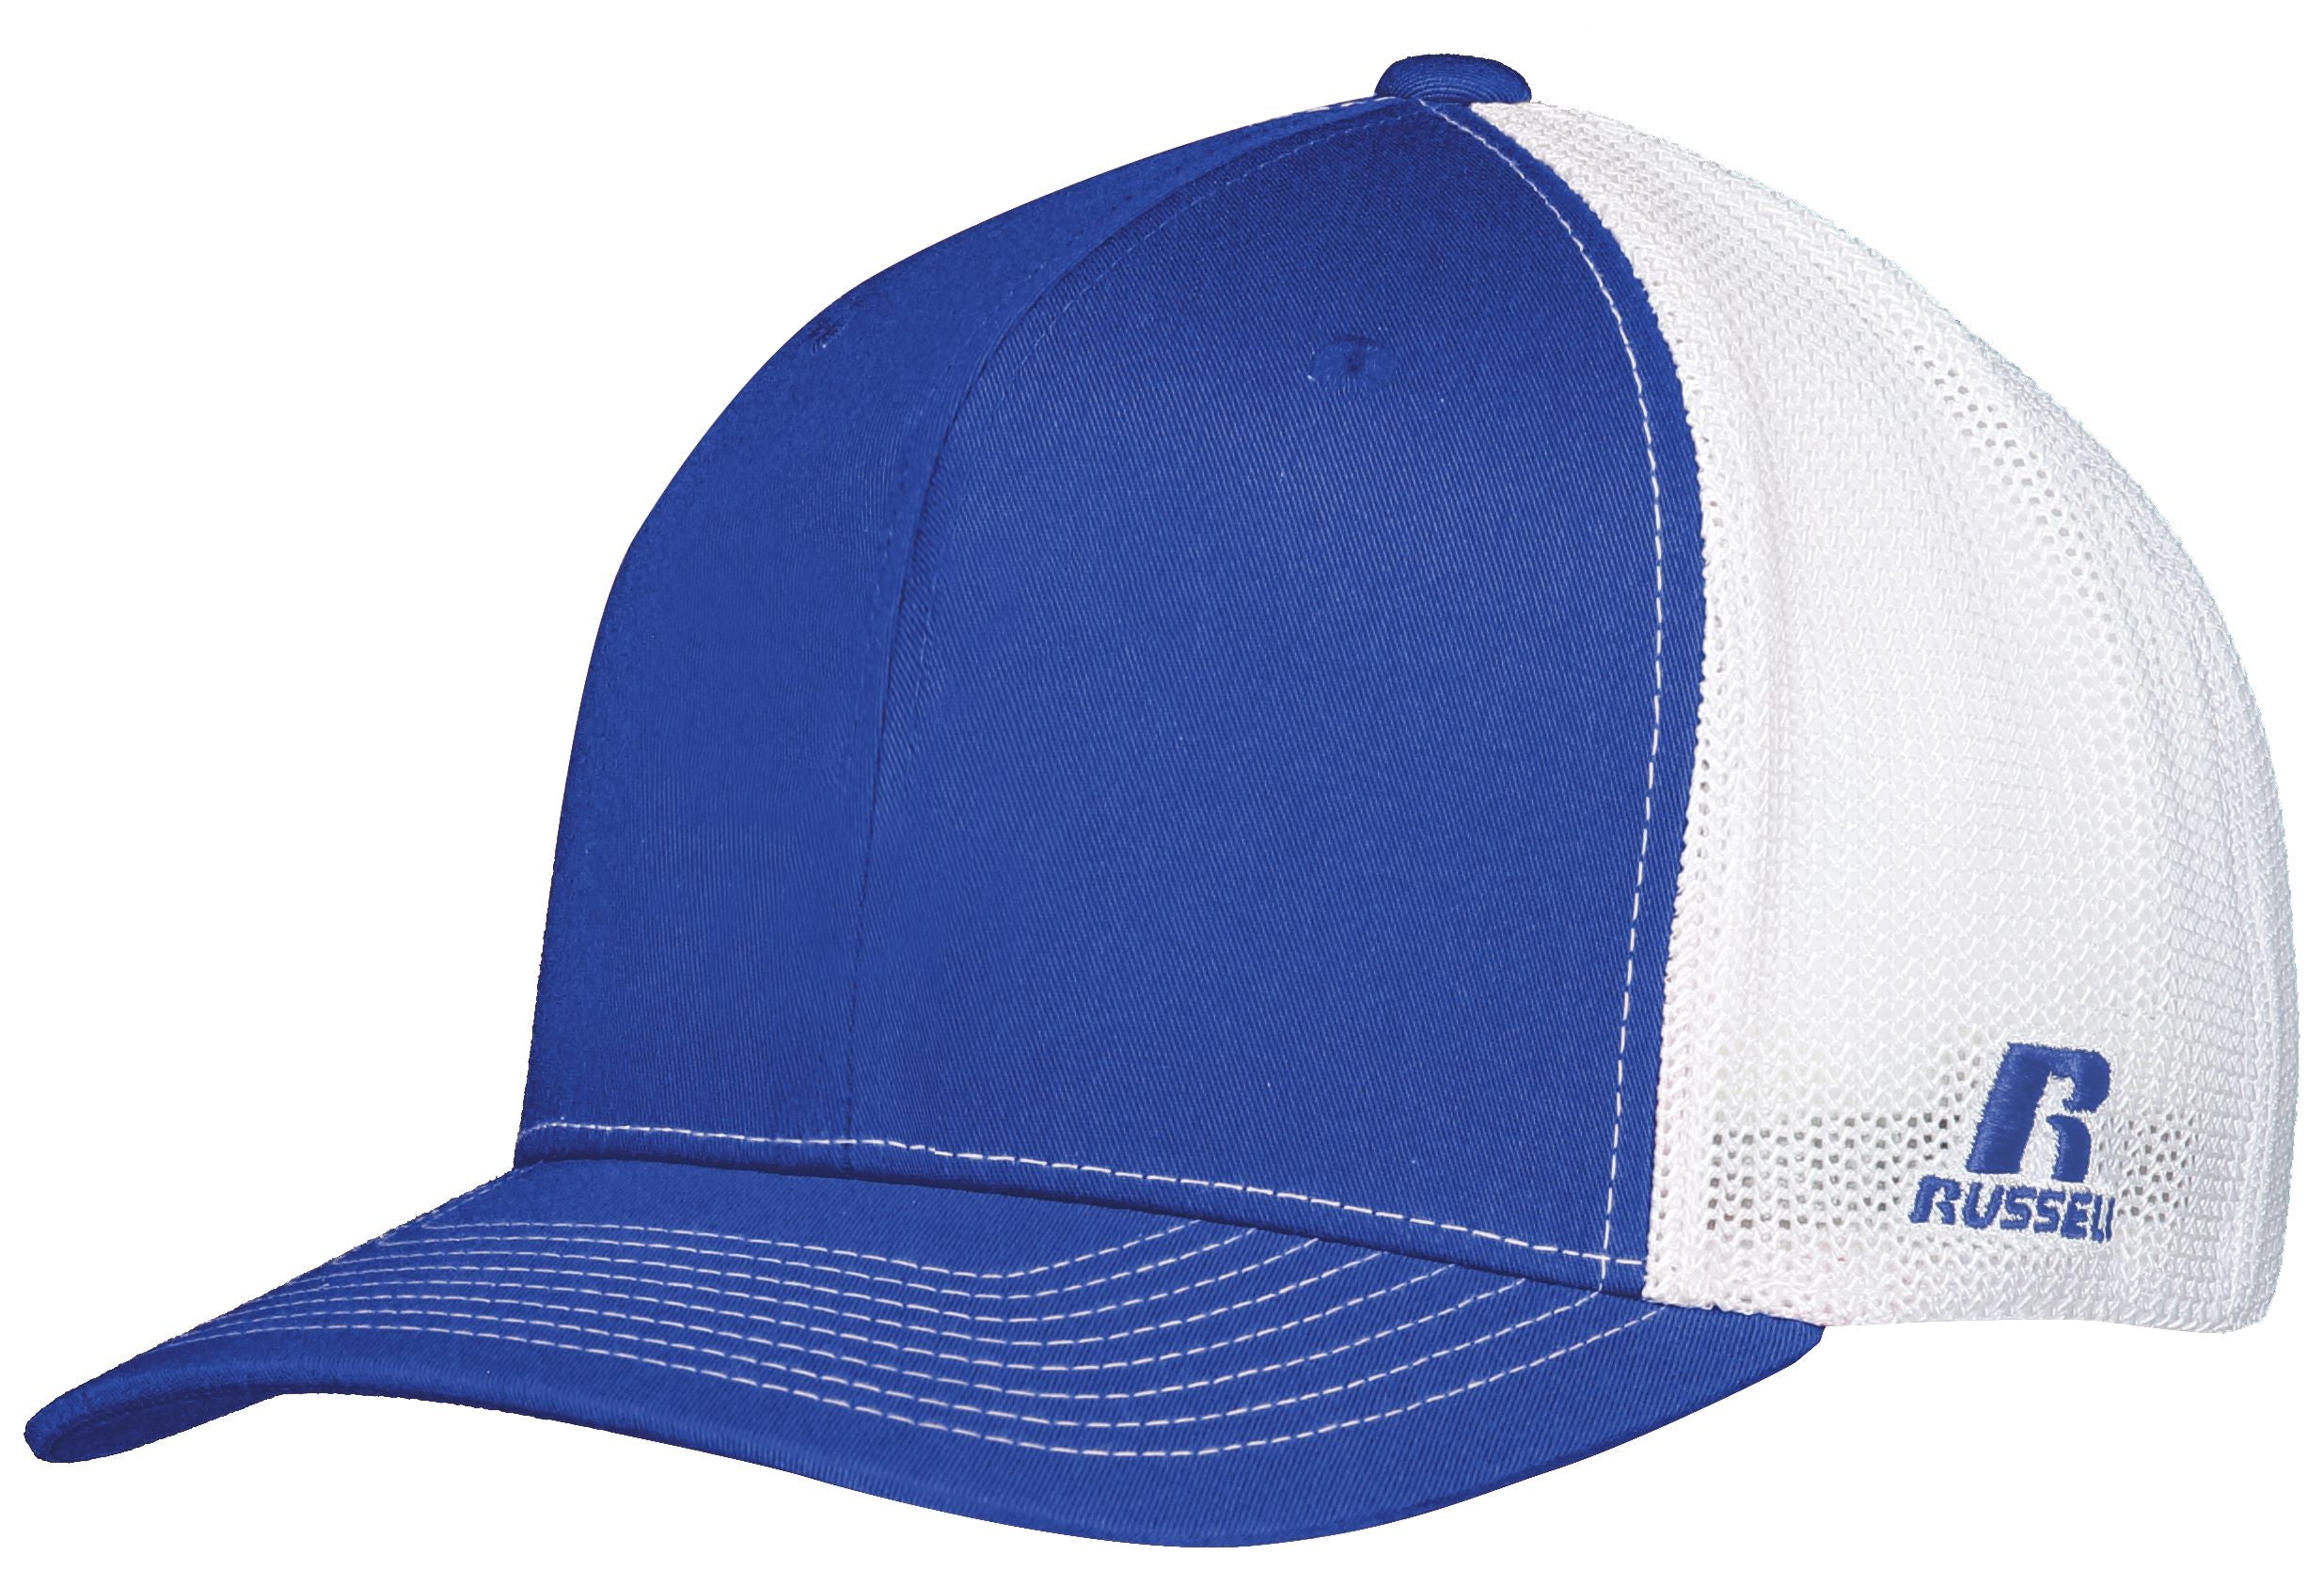 Russell Athletic Flexfit Twill Mesh Cap in Royal/White  -Part of the Adult, Headwear, Headwear-Cap, Russell-Athletic-Products product lines at KanaleyCreations.com